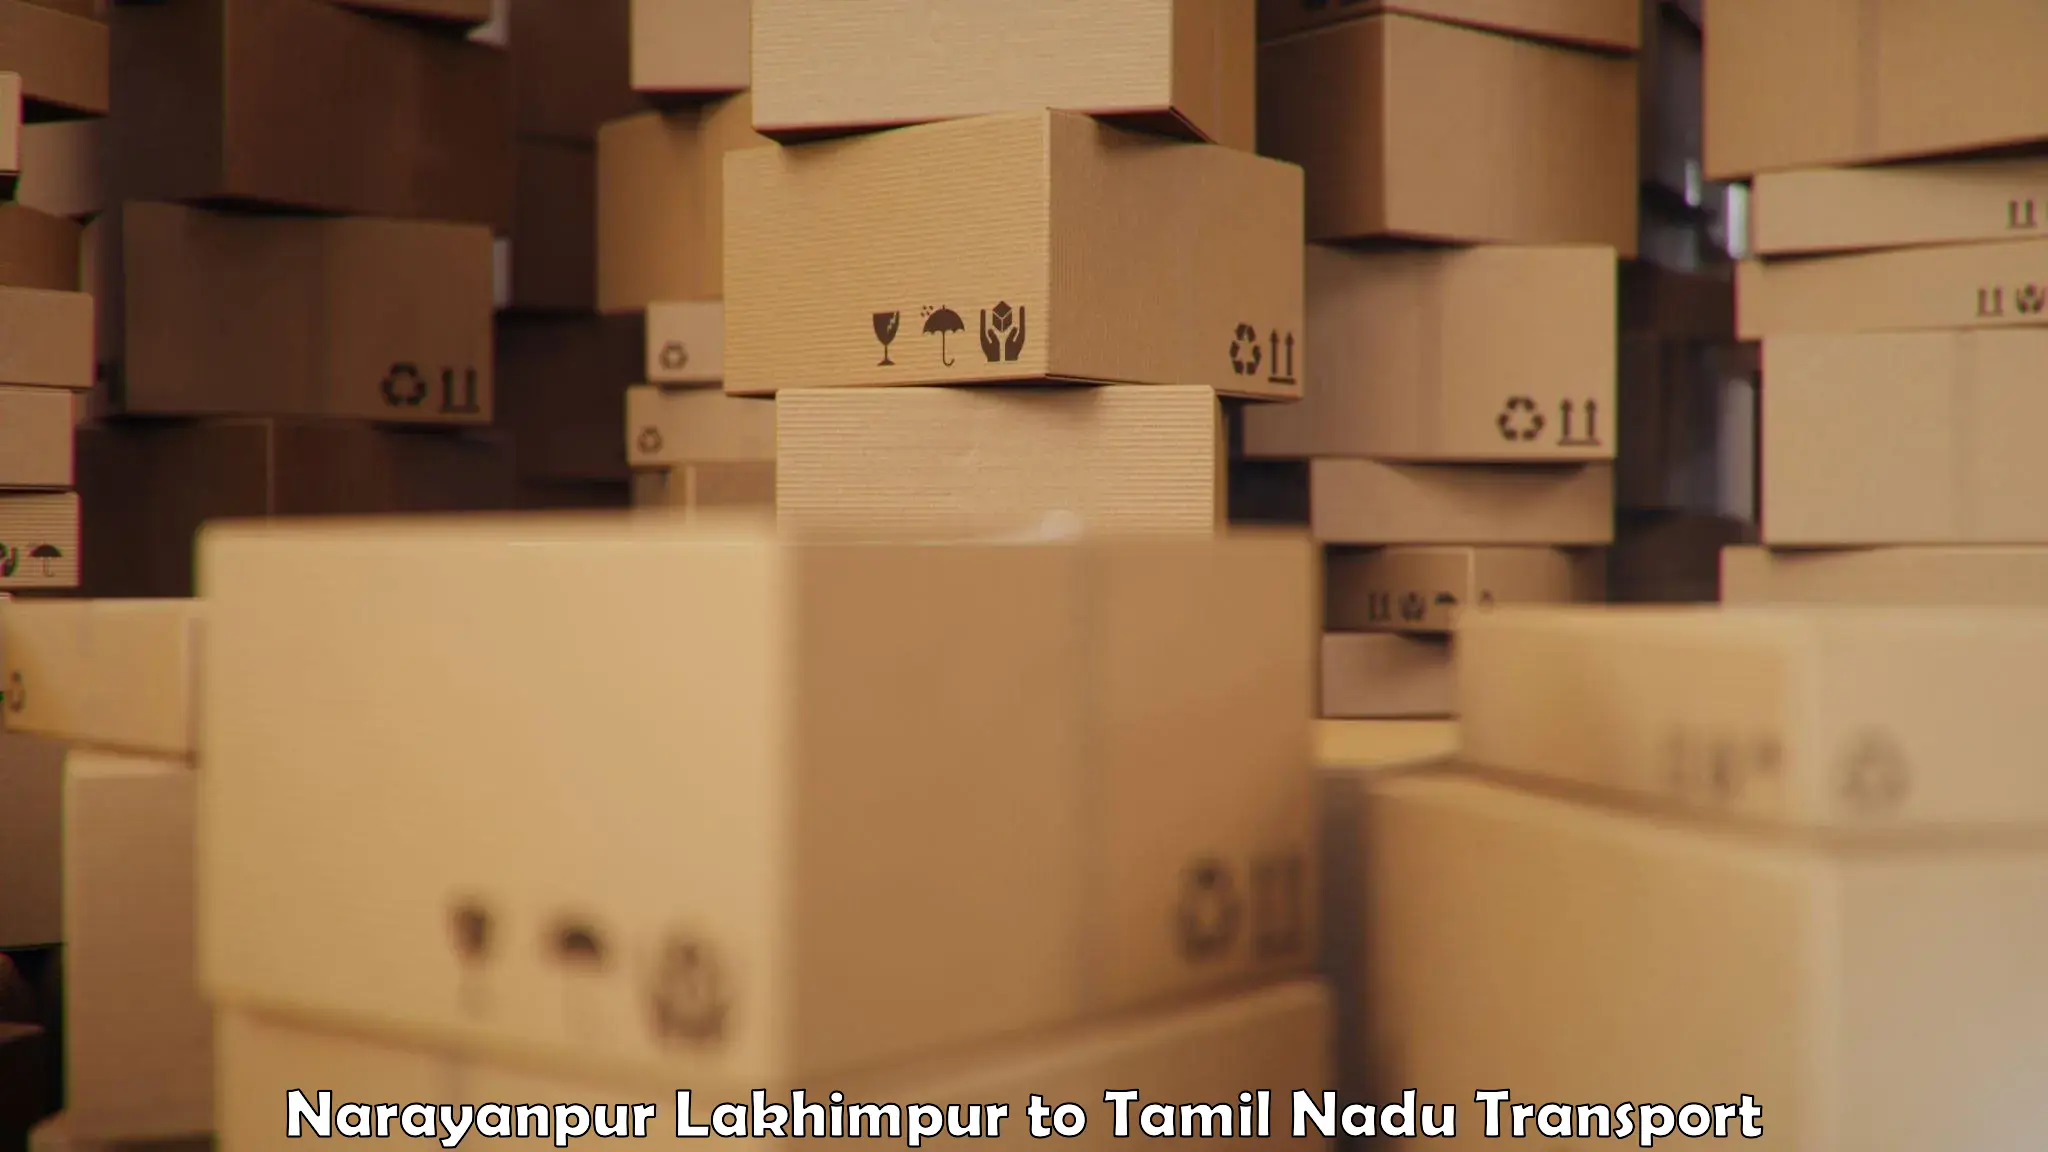 Container transport service Narayanpur Lakhimpur to Cuddalore